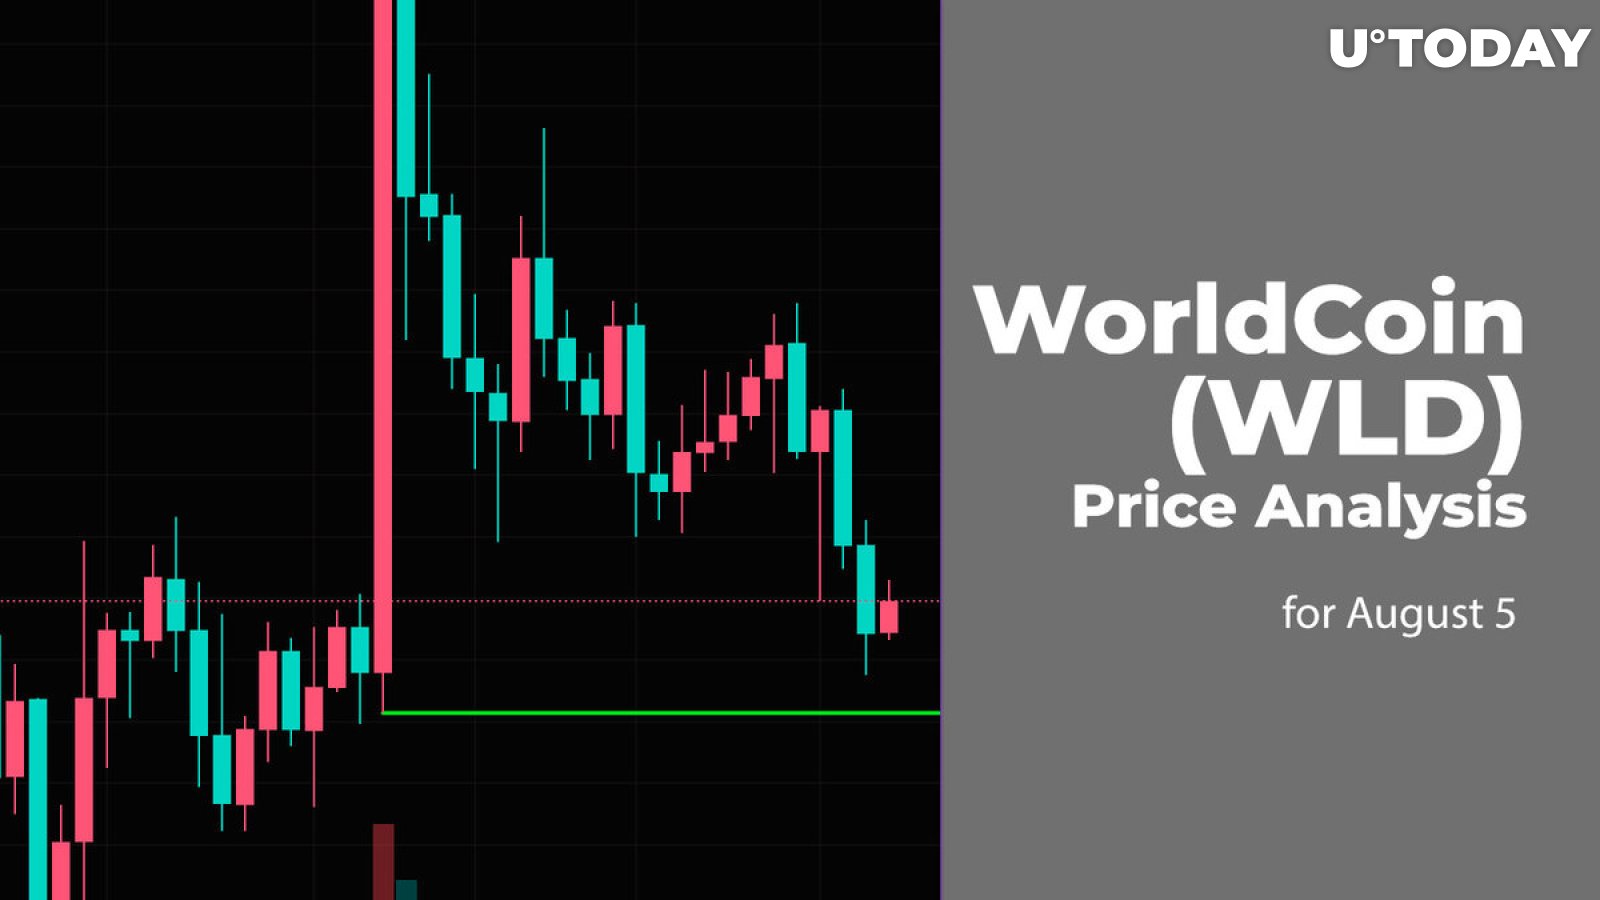 Worldcoin (WLD) Price Analysis for August 5